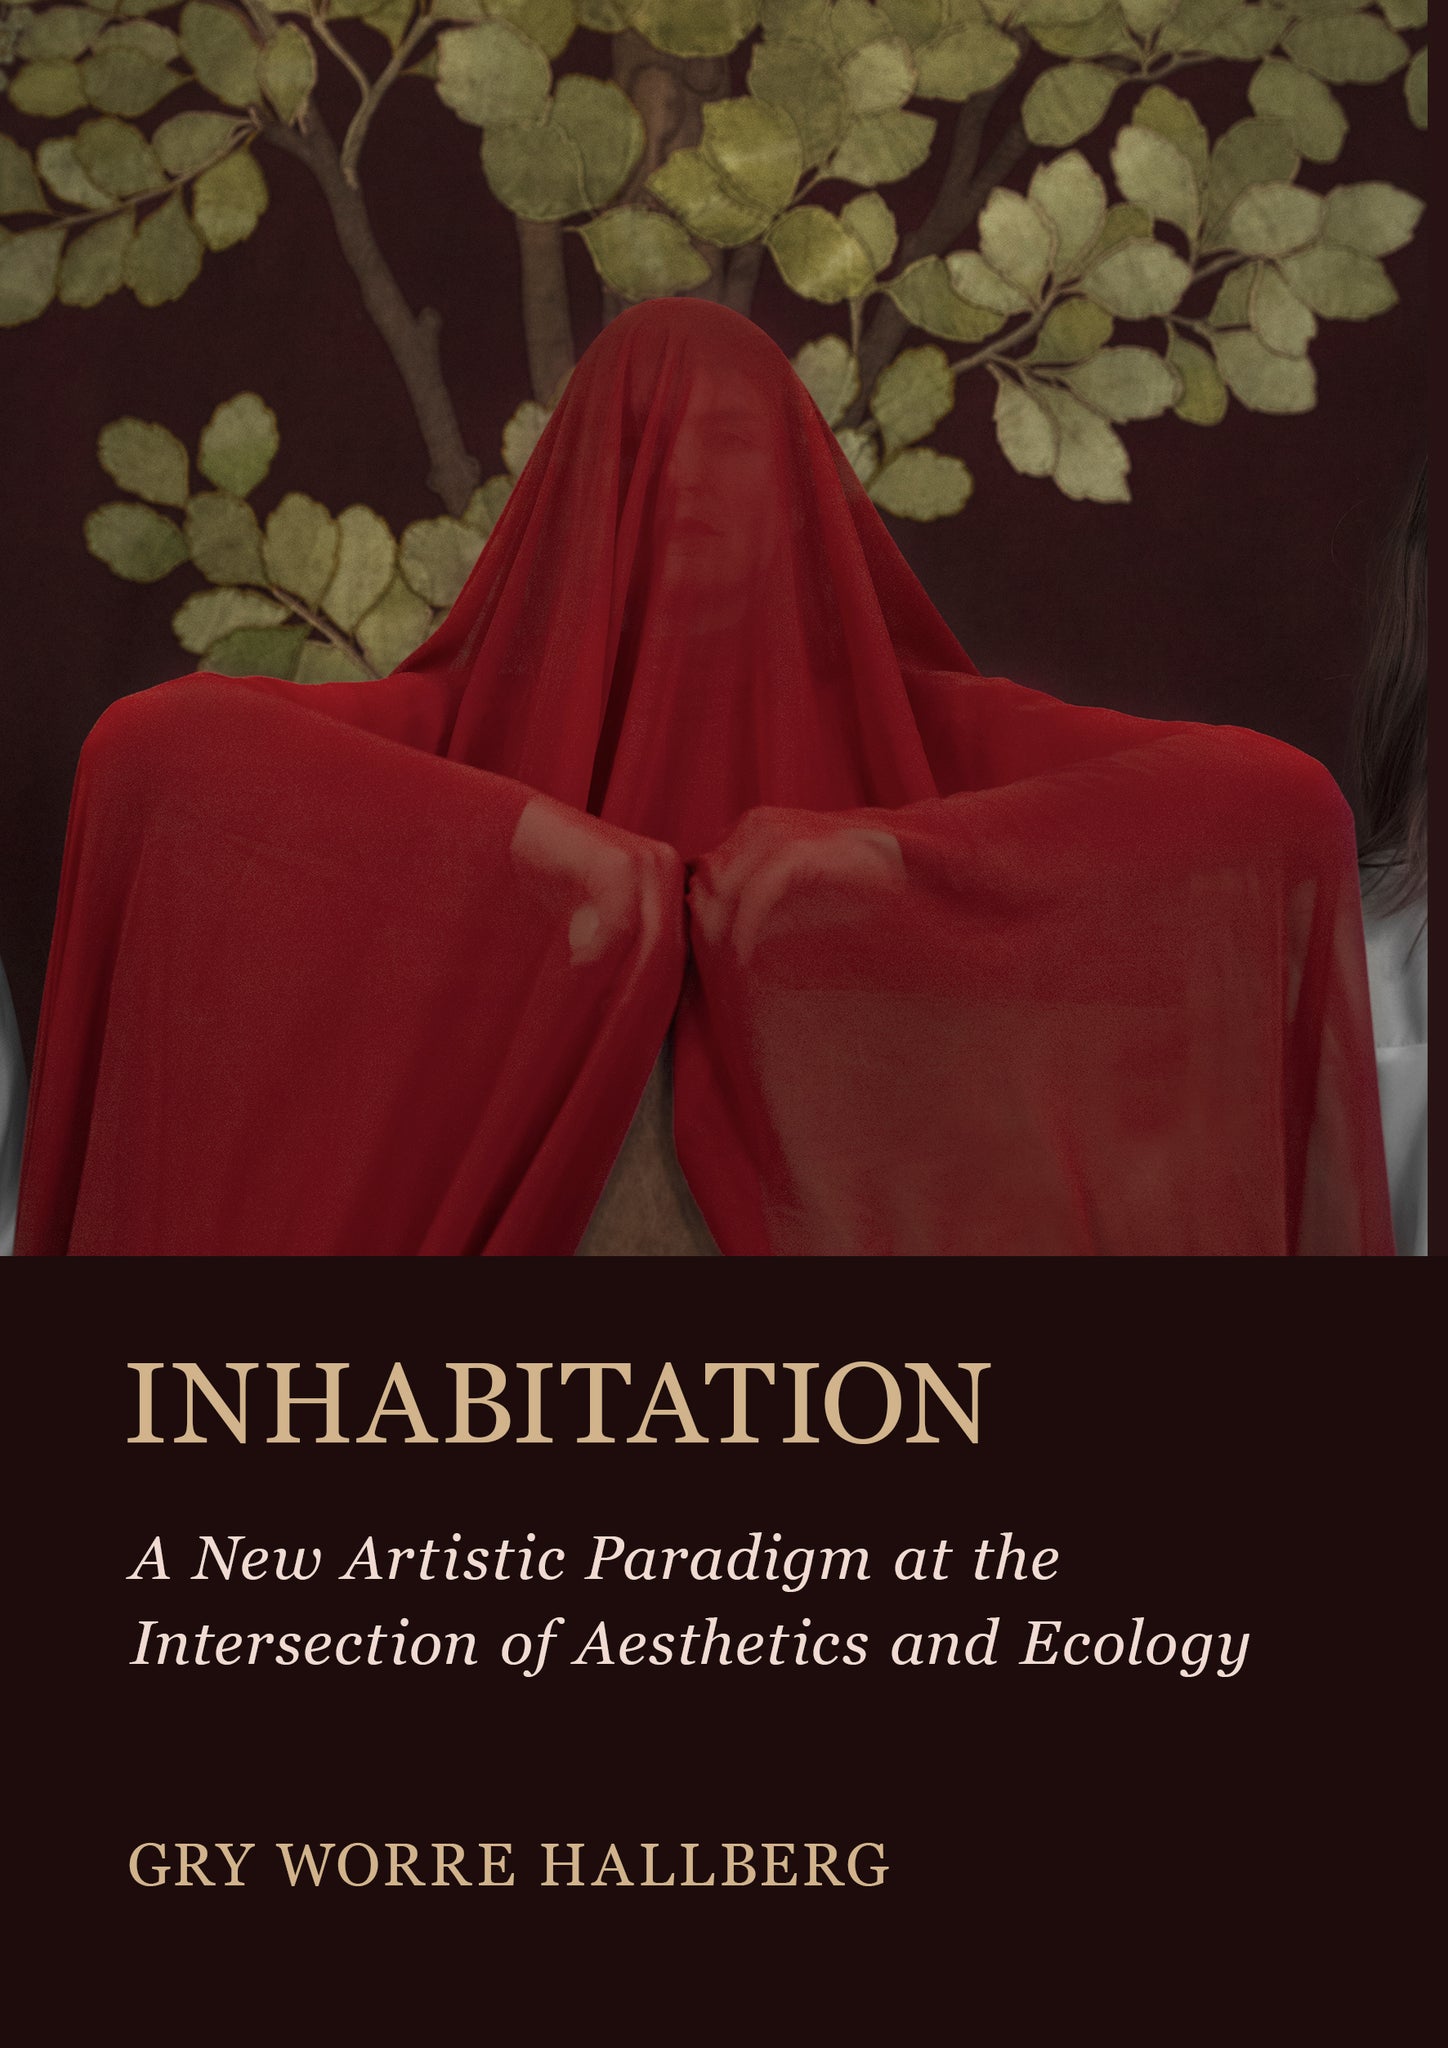 Inhabitation: A New Artistic Paradigm at the Intersection of Aesthetics and Ecology